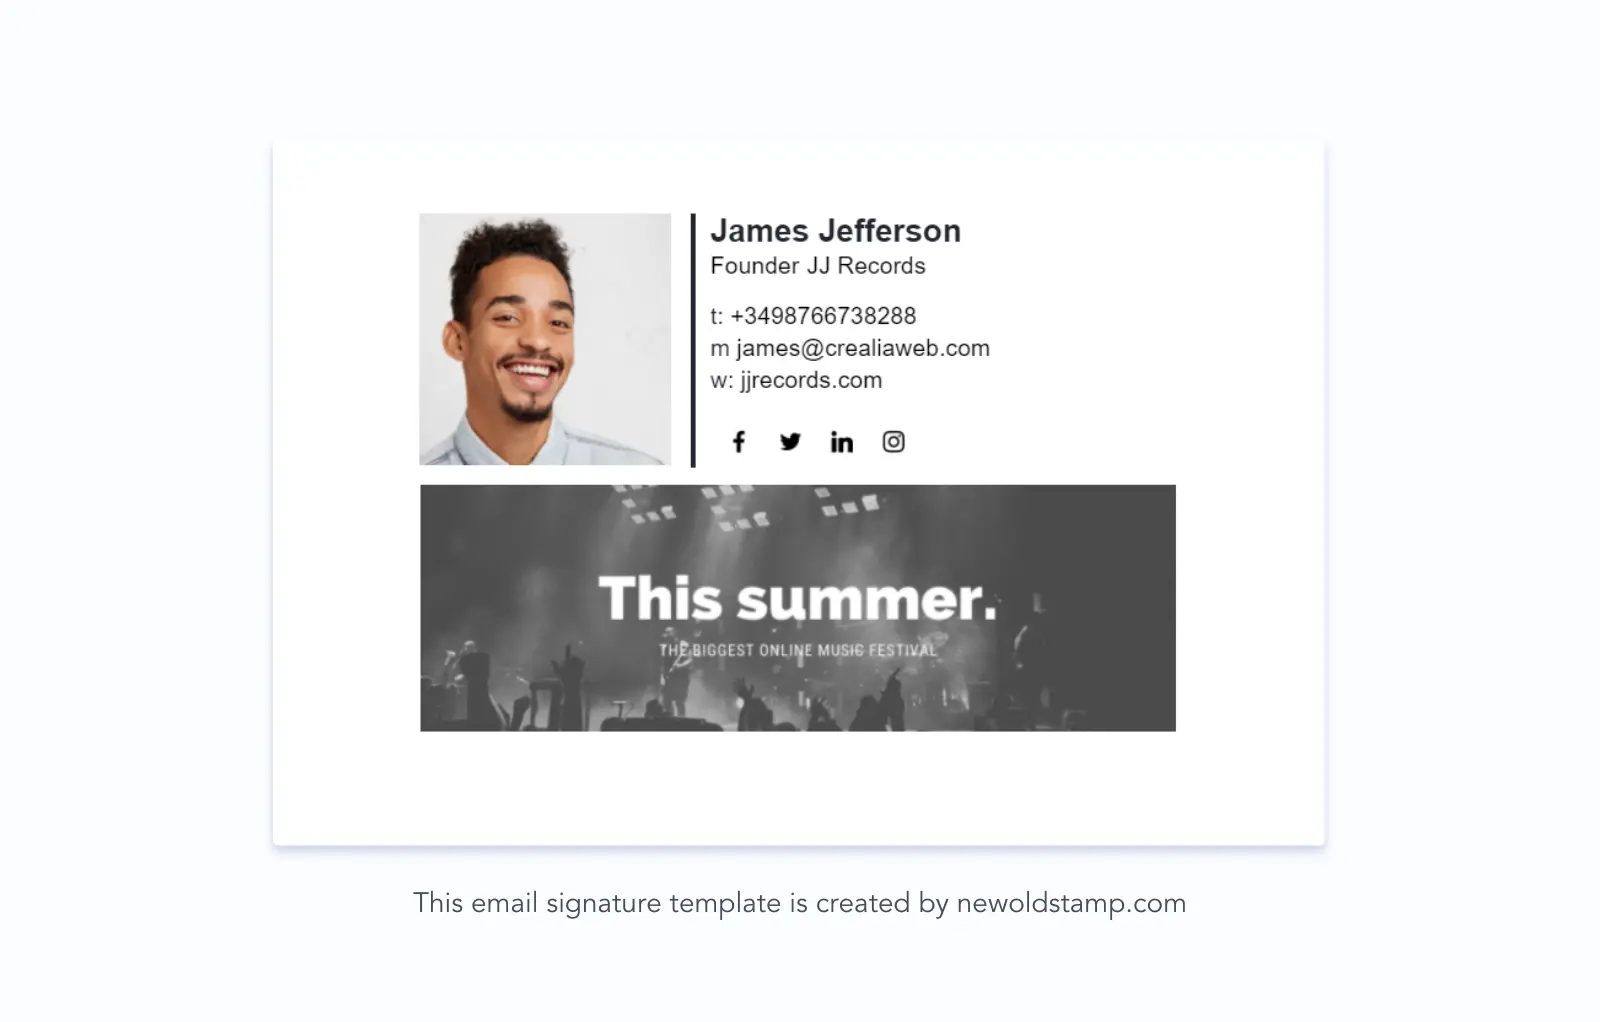 Newoldstamp email signature with social media buttons